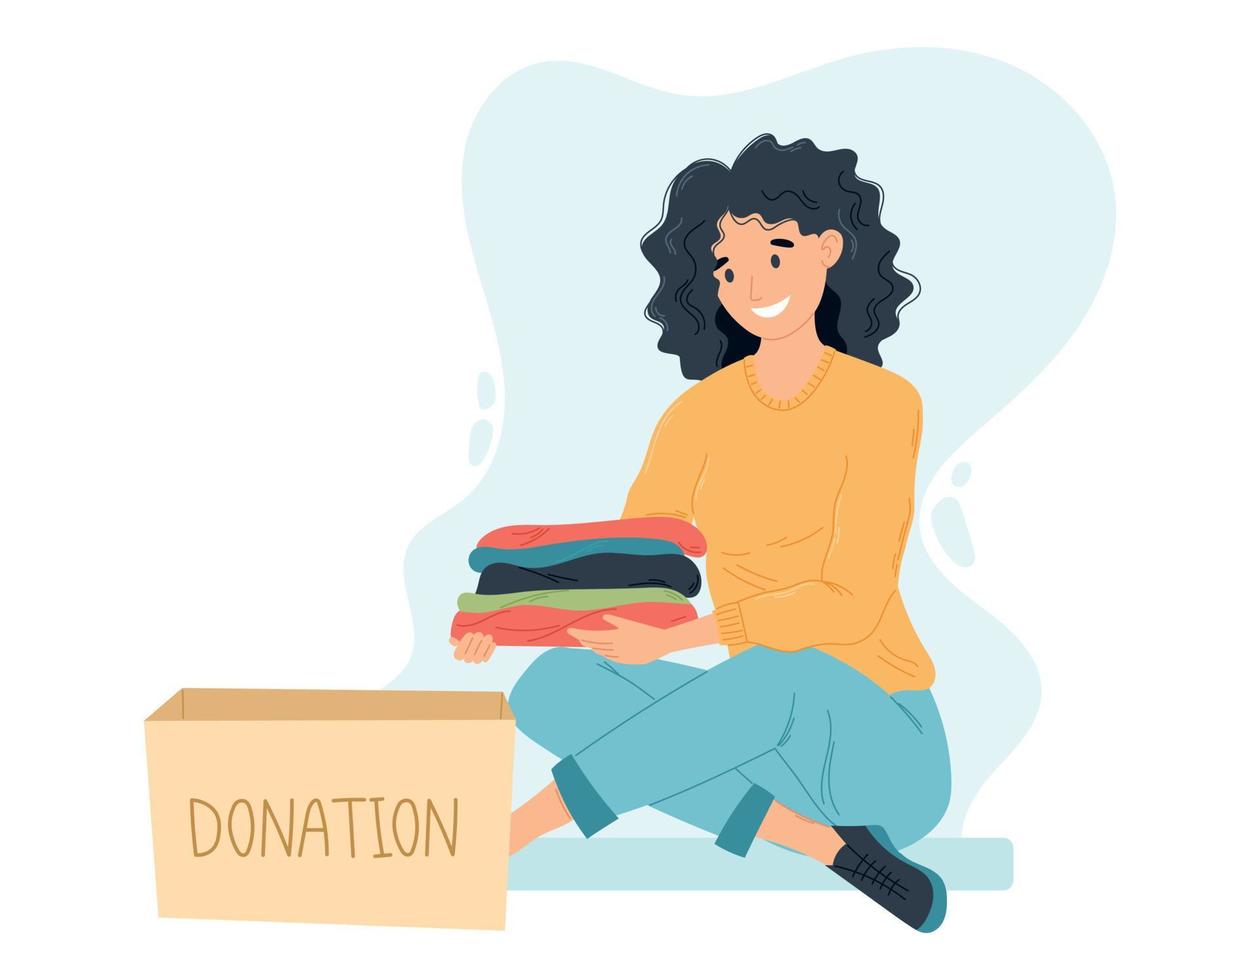 Smiling woman sitting with stack of clothes and donation box. Sharing things with people. Time for charity design element. Vector flat illustration.